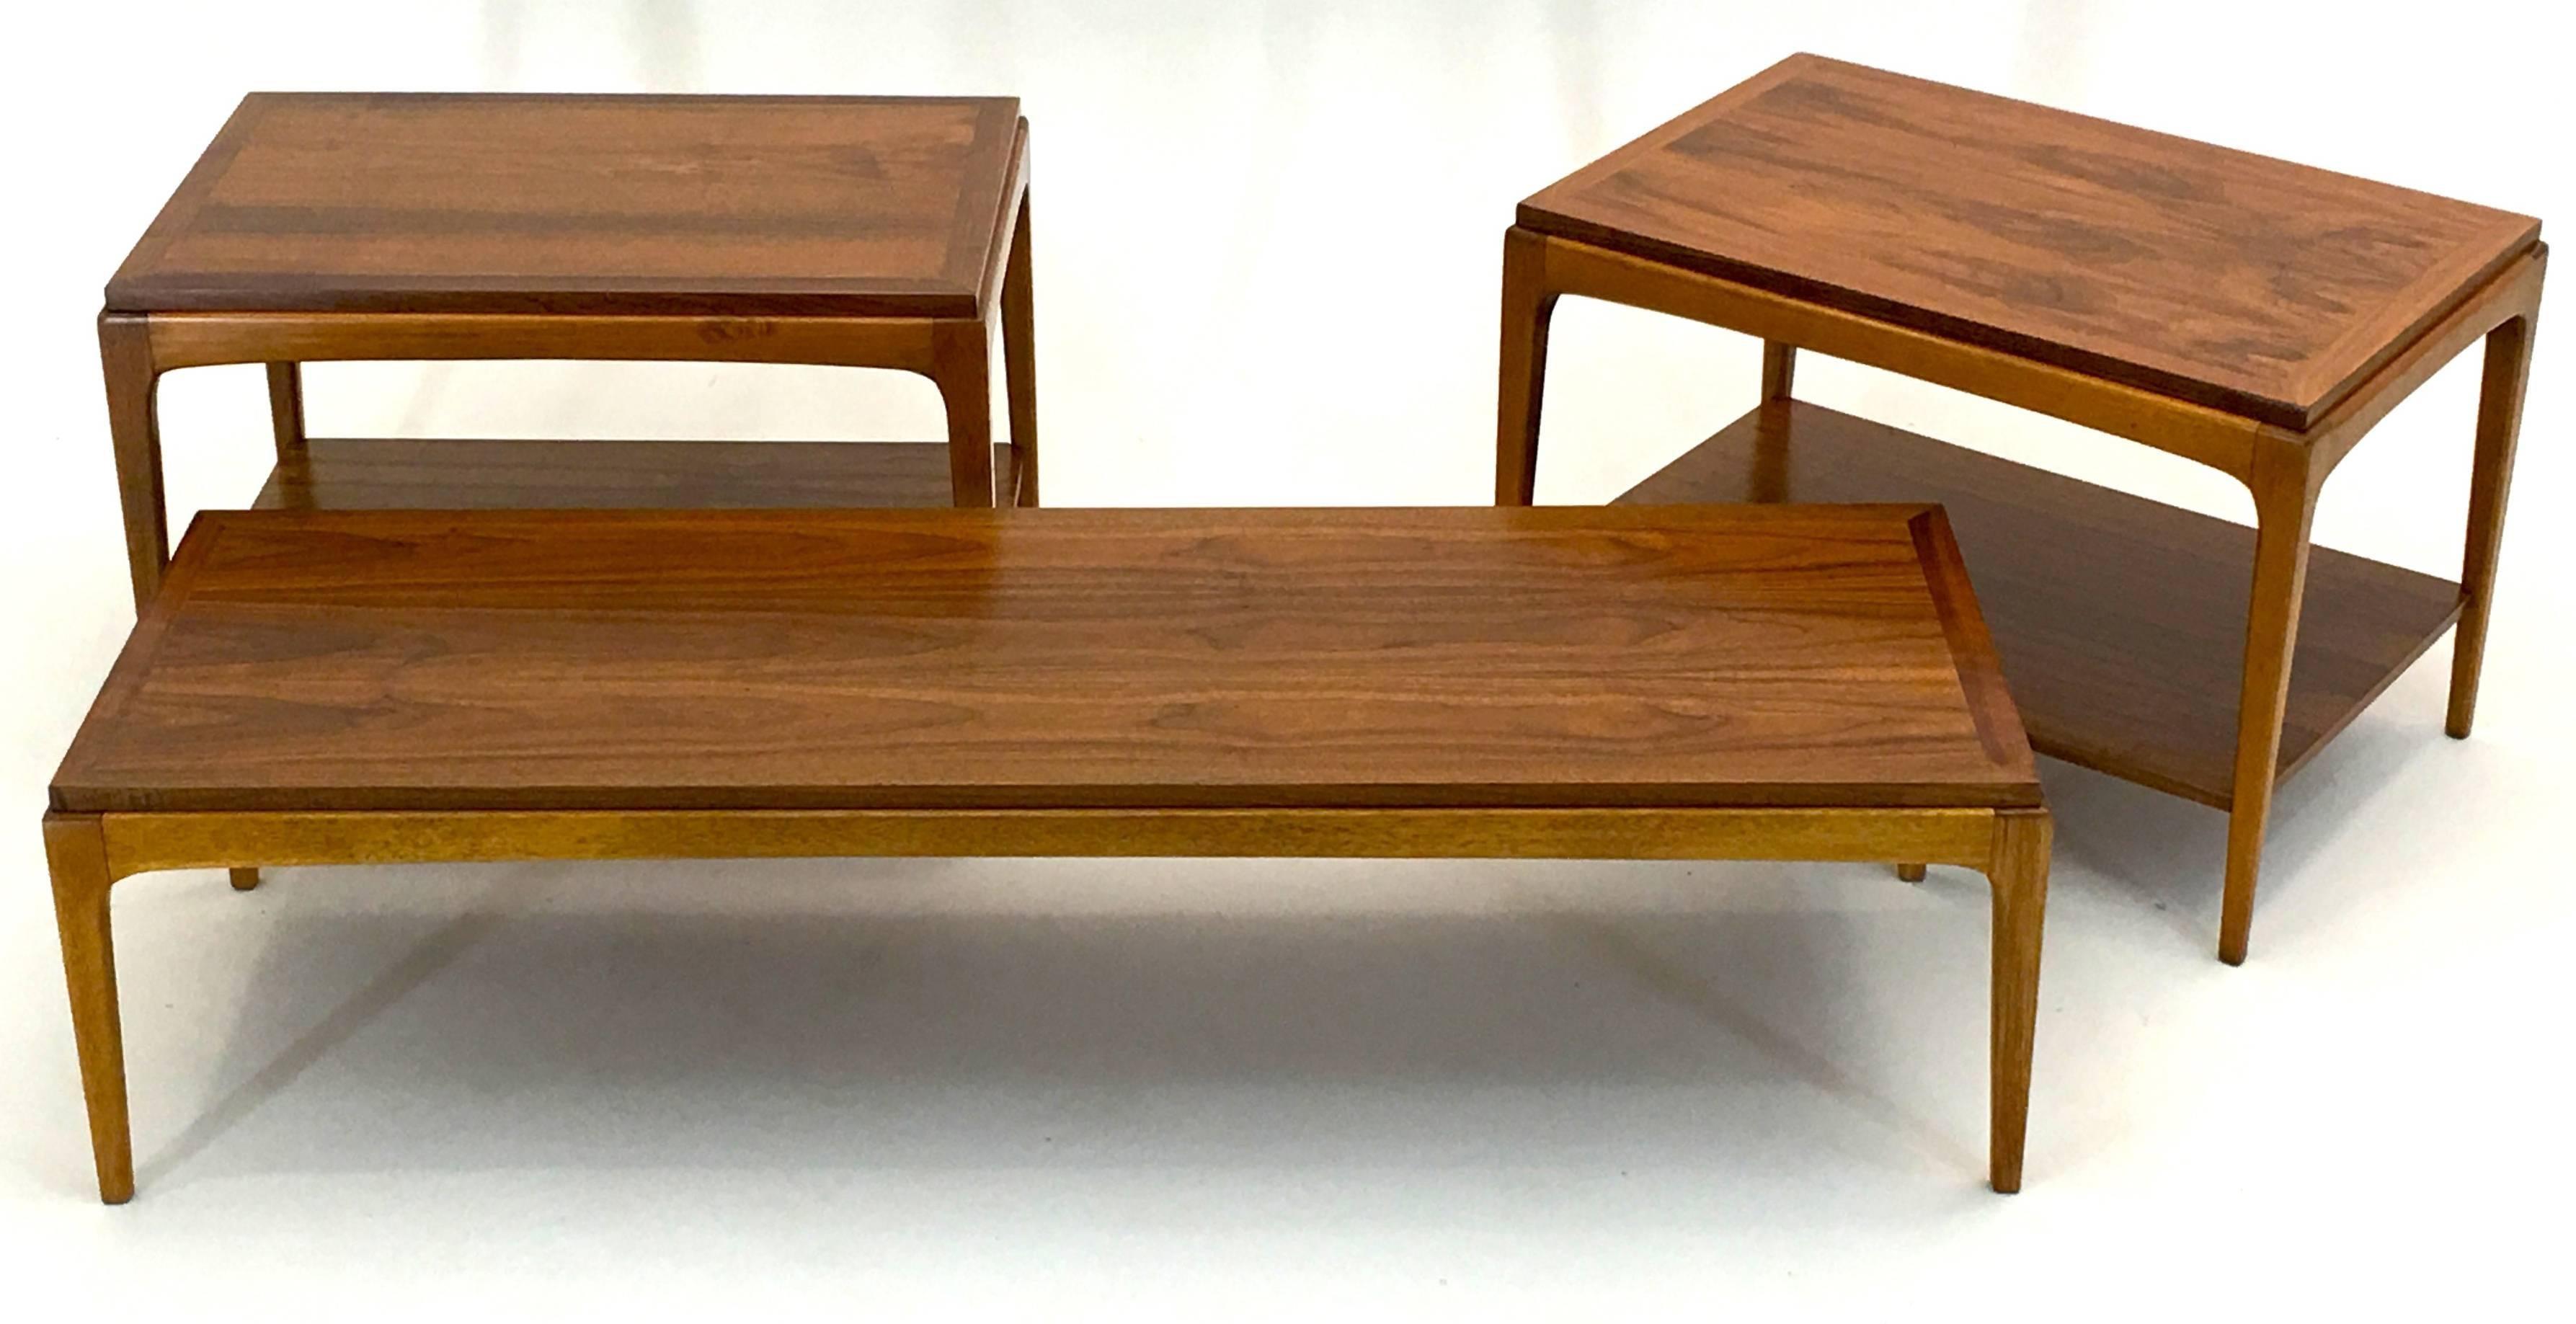 A fully complete set of Minimalist tables by Lane in premium walnut dated and signed 1966.

The two end tables are two-tier and measure 20.25" tall and 29.5" deep and 20,5" wide. The main cocktail coffee table is a low table